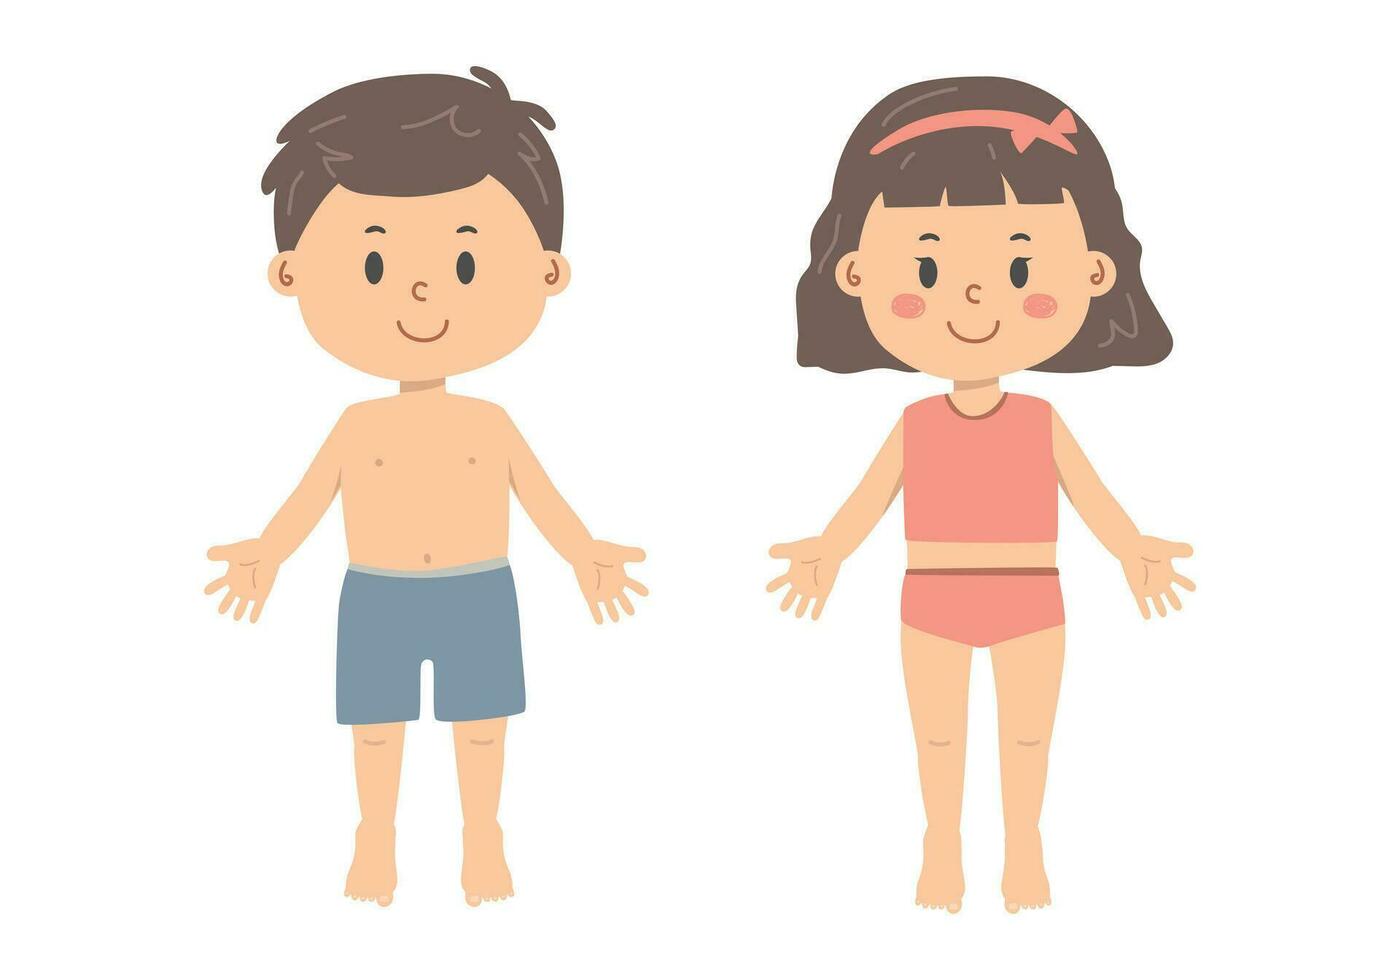 Human body vector illustration flat style. Cute boy and girl body clipart cartoon style. Human body vector illustration flat cartoon style. Head, eye, neck, shoulder, chest, leg, foot